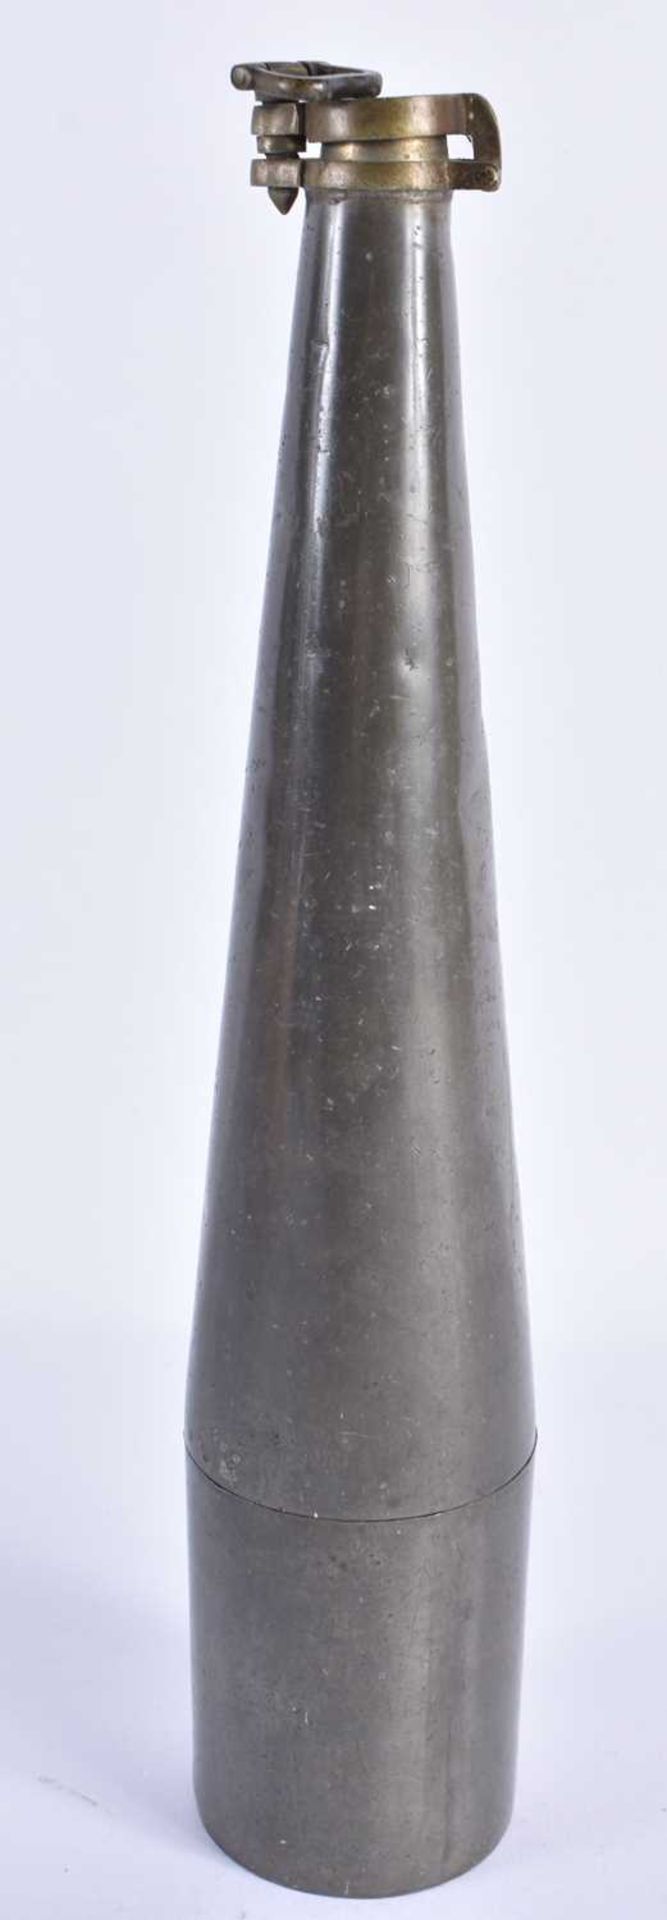 A Pewter Drinking Flask with detachable cup on base. 25.5cm x 5cm, weight 304g.